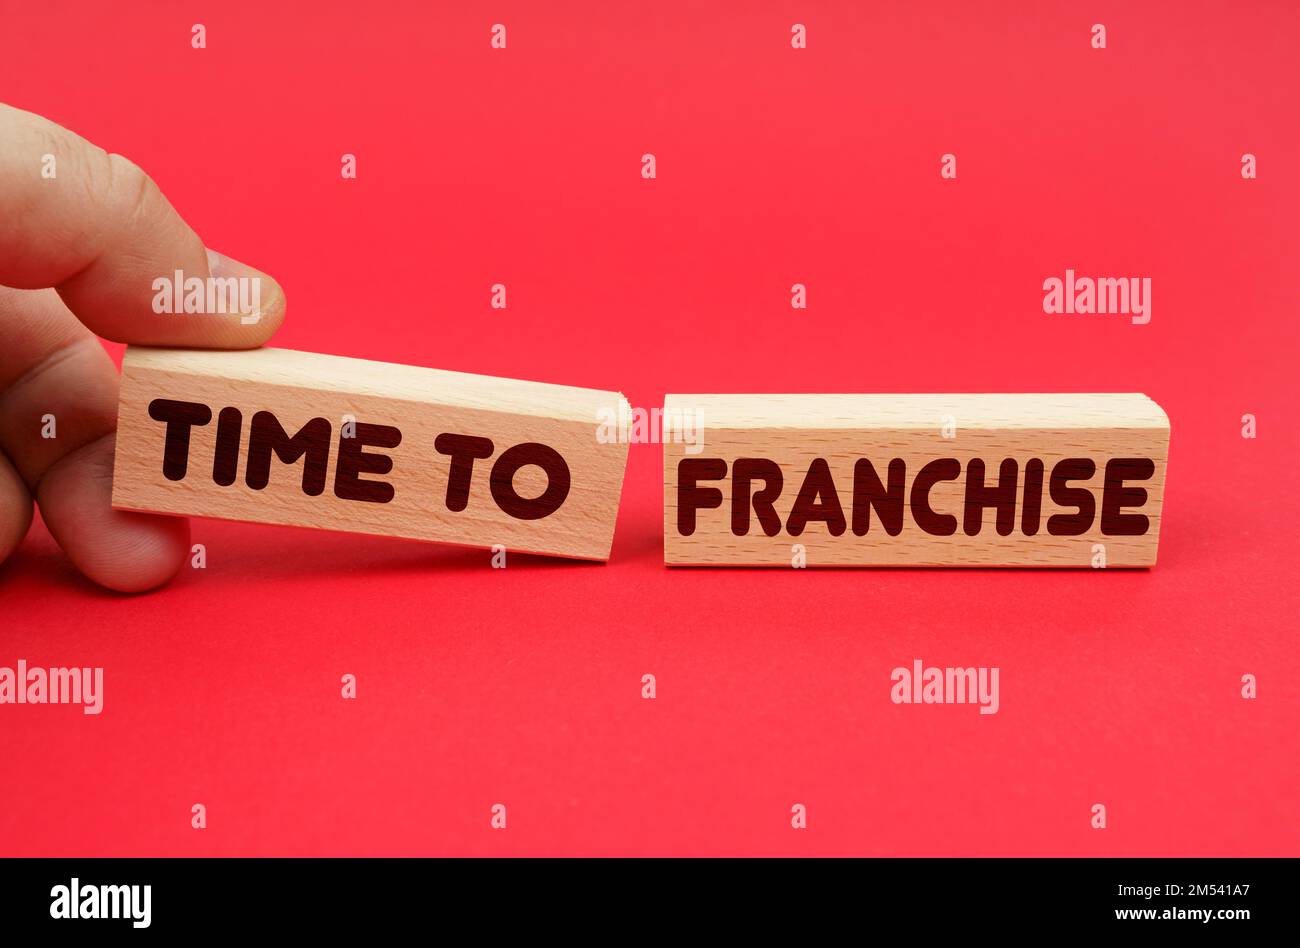 Business concept. On a red background, wooden blocks, one of them in hand. The blocks are written - Time to Franchise Stock Photo